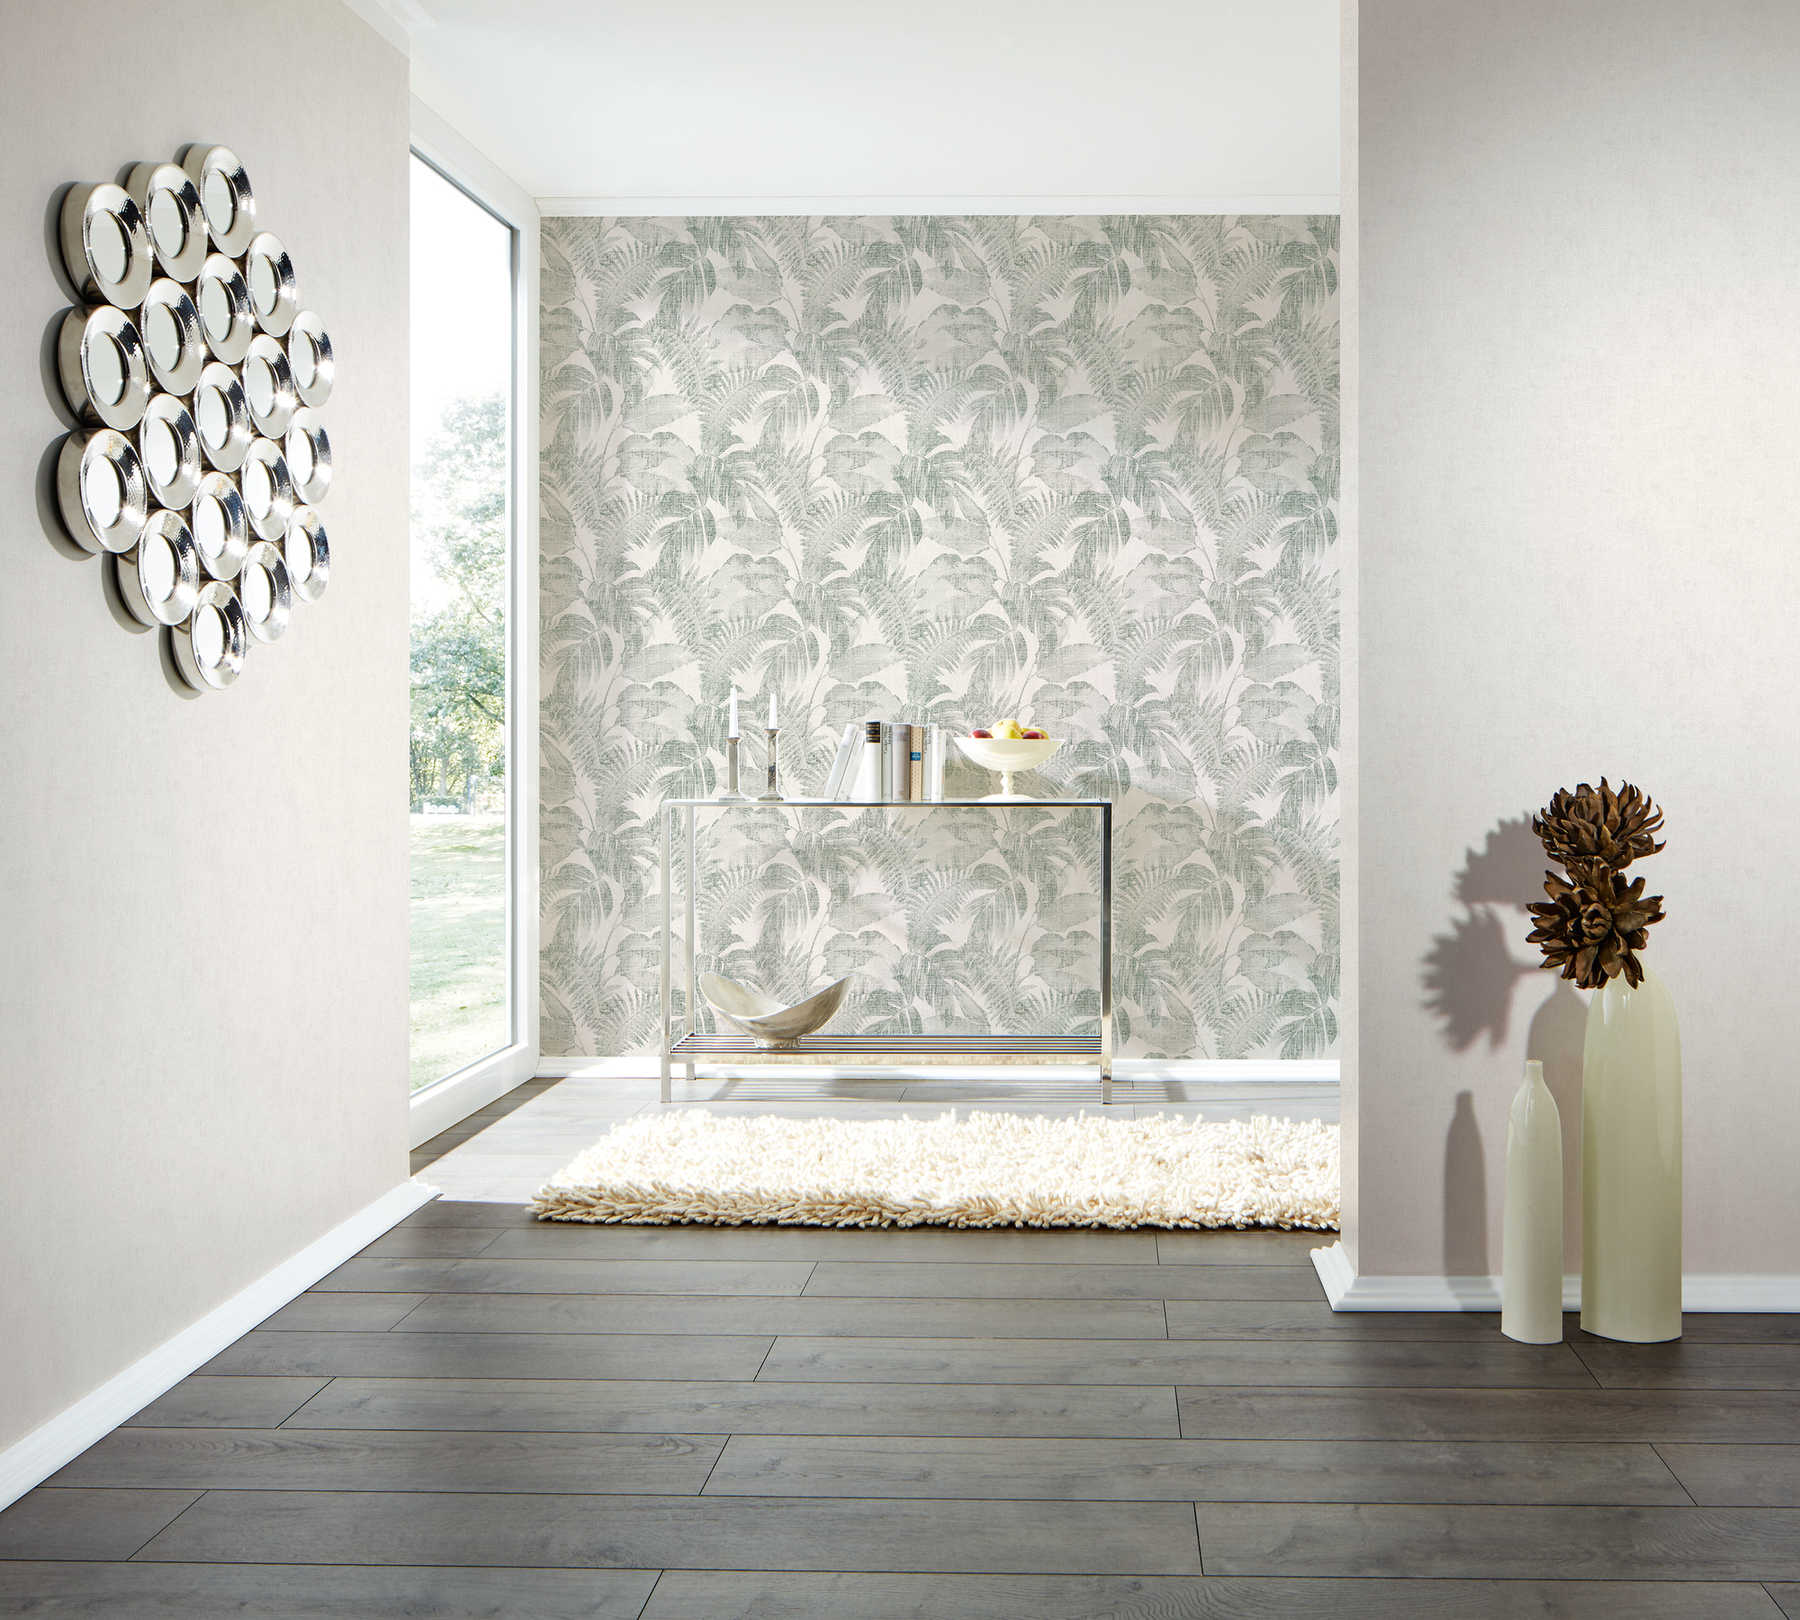             Plain wallpaper mottled with textile look - cream
        